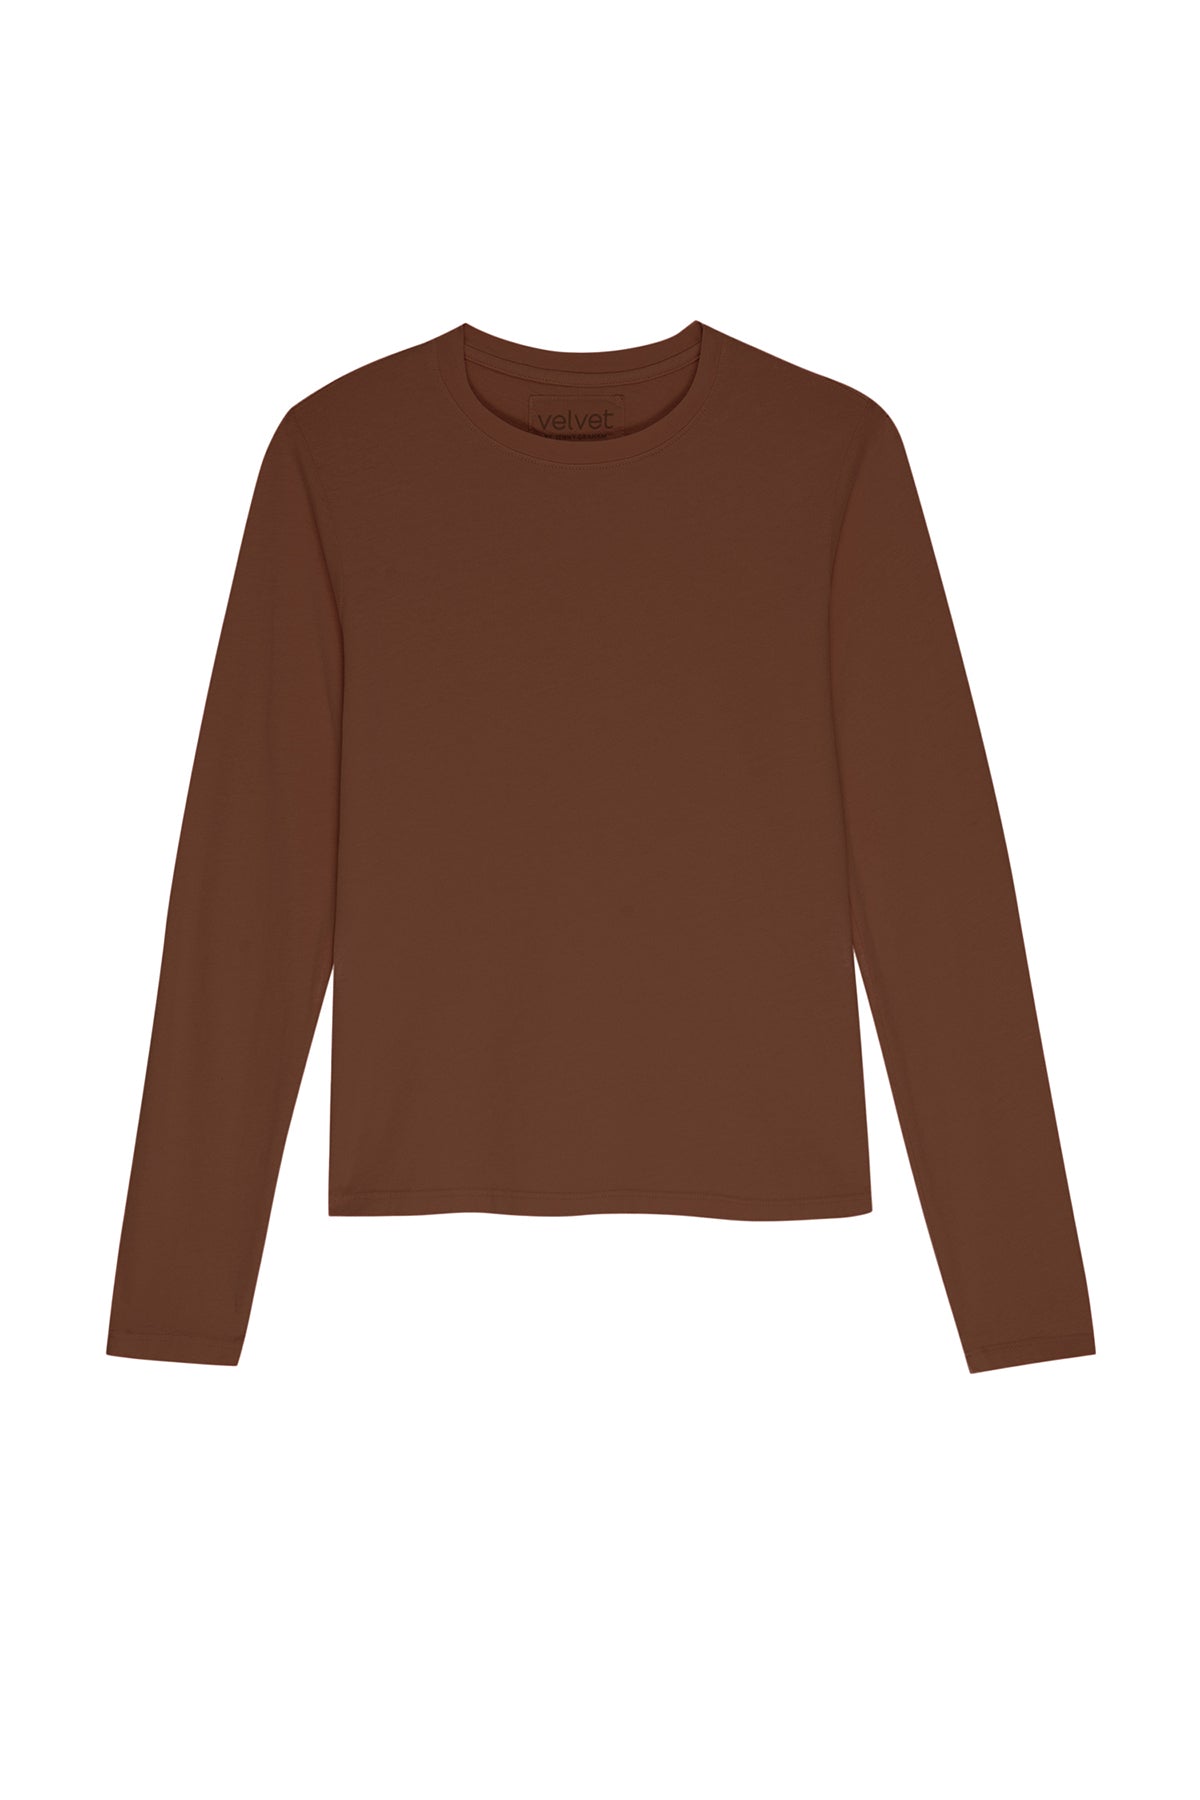 a brown long-sleeved VICENTE TEE by Velvet by Jenny Graham.-24427644190913